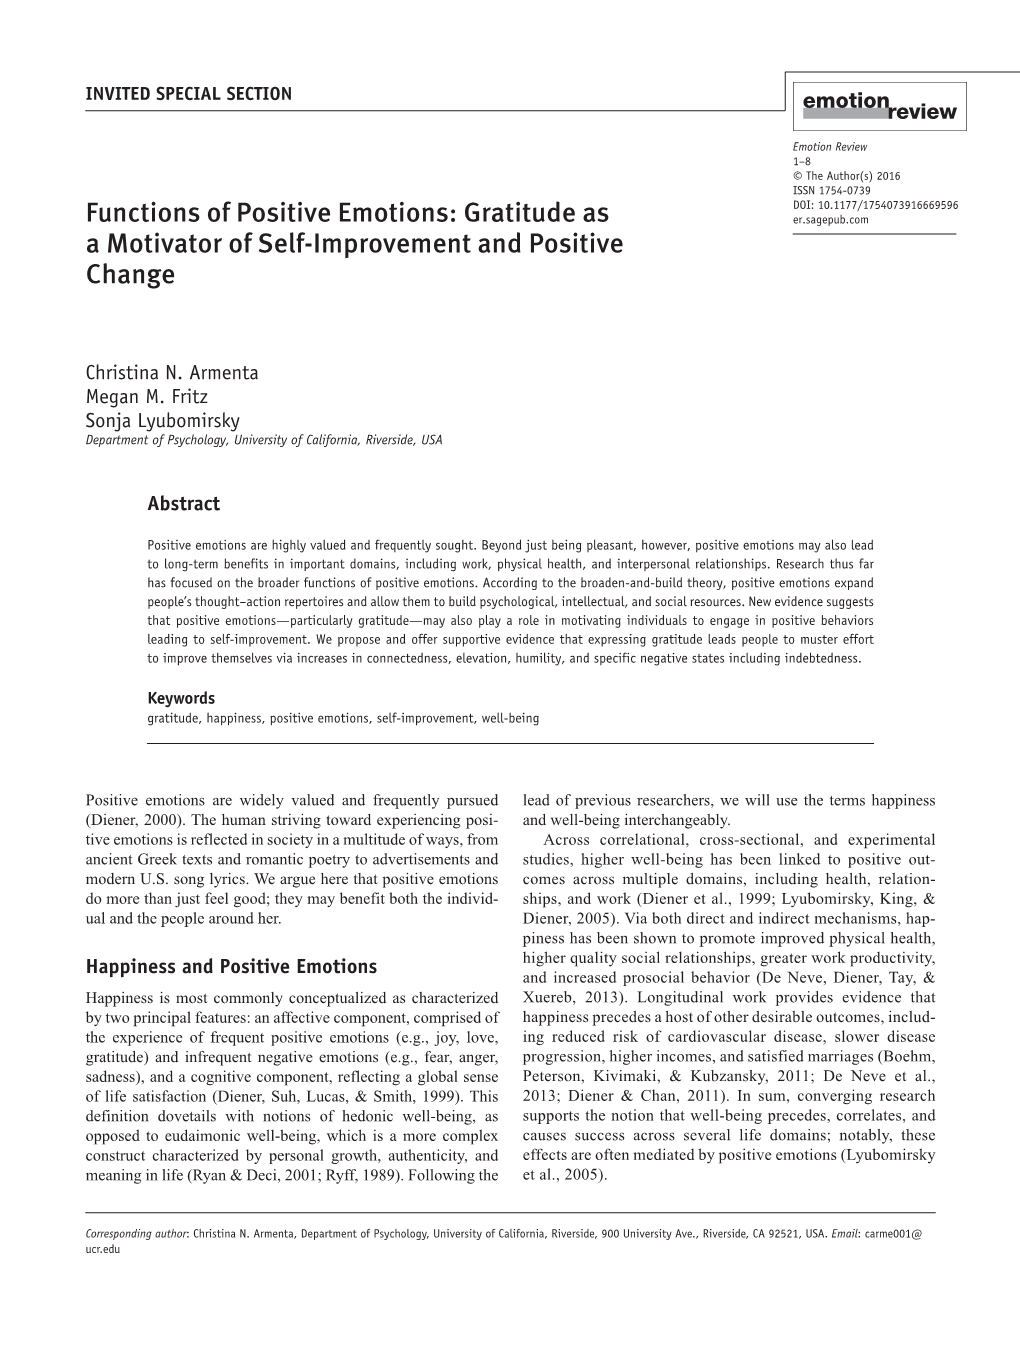 Functions of Positive Emotions: Gratitude As a Motivator of Self